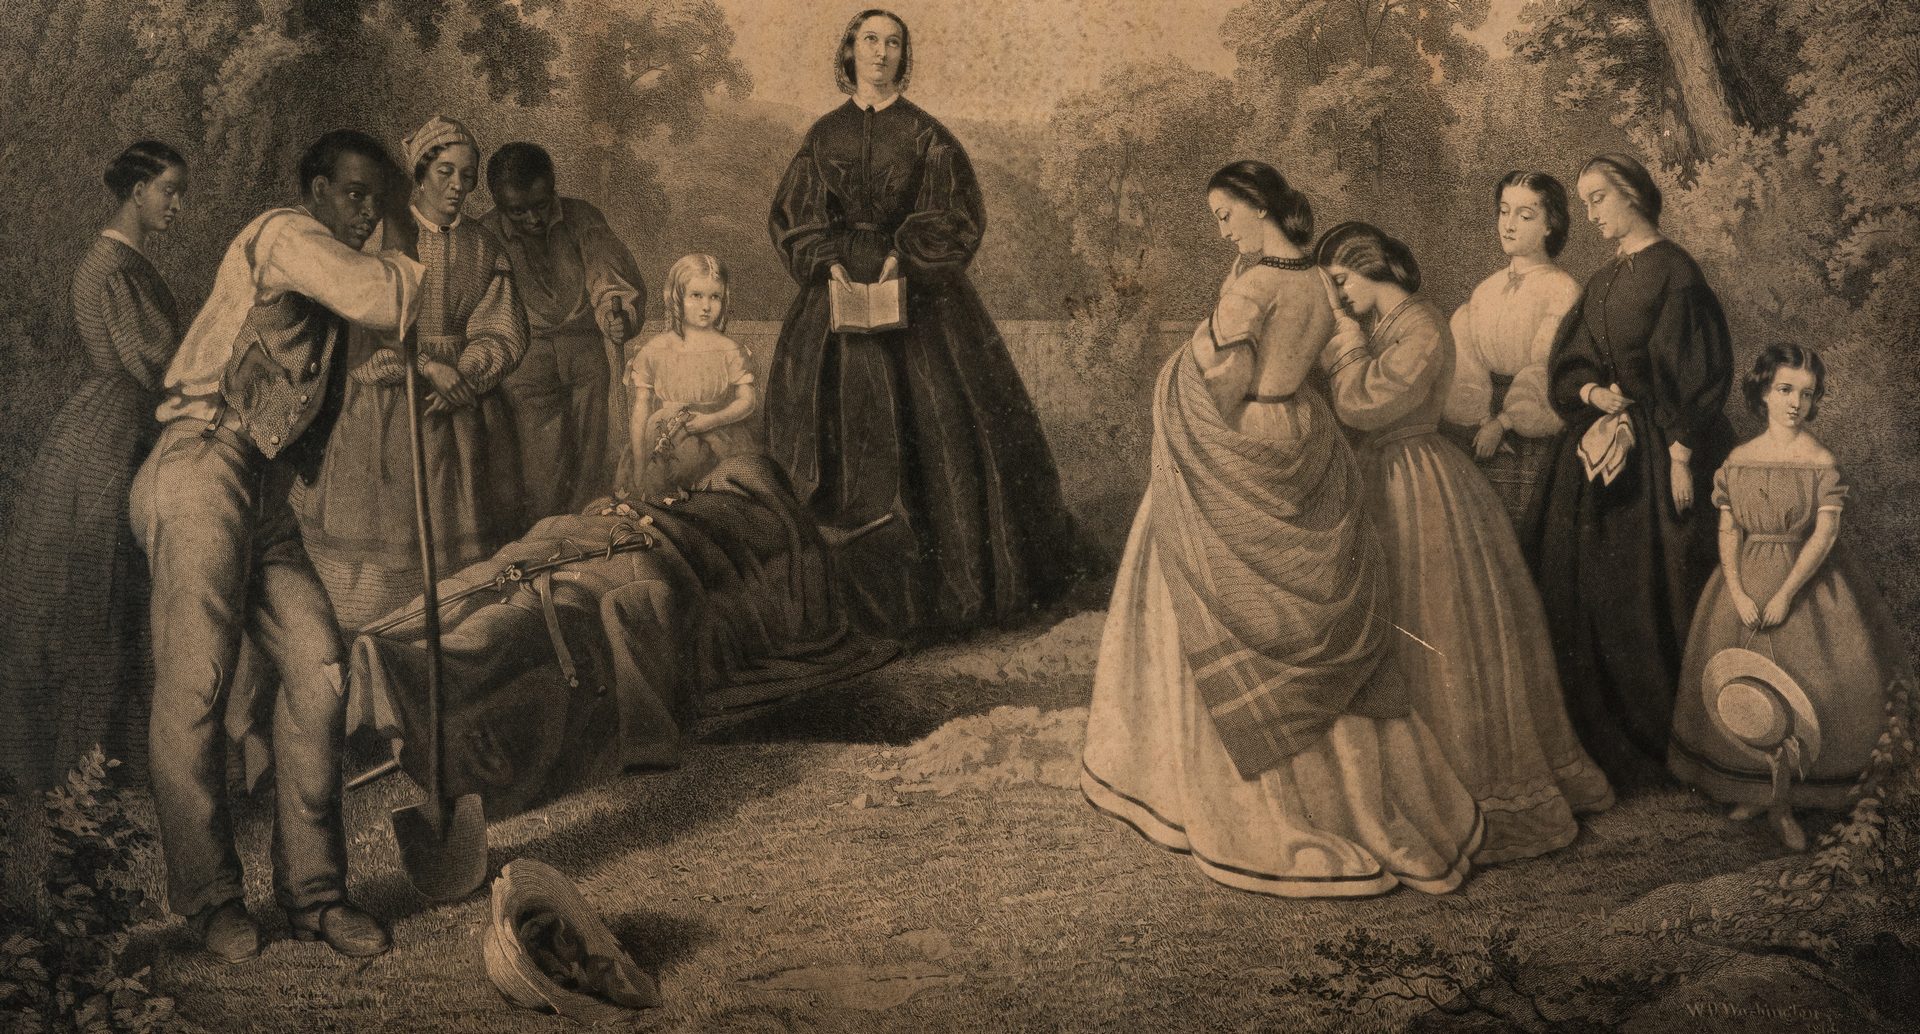 Lot 536:  Burial of Latane engraving, 19th c.